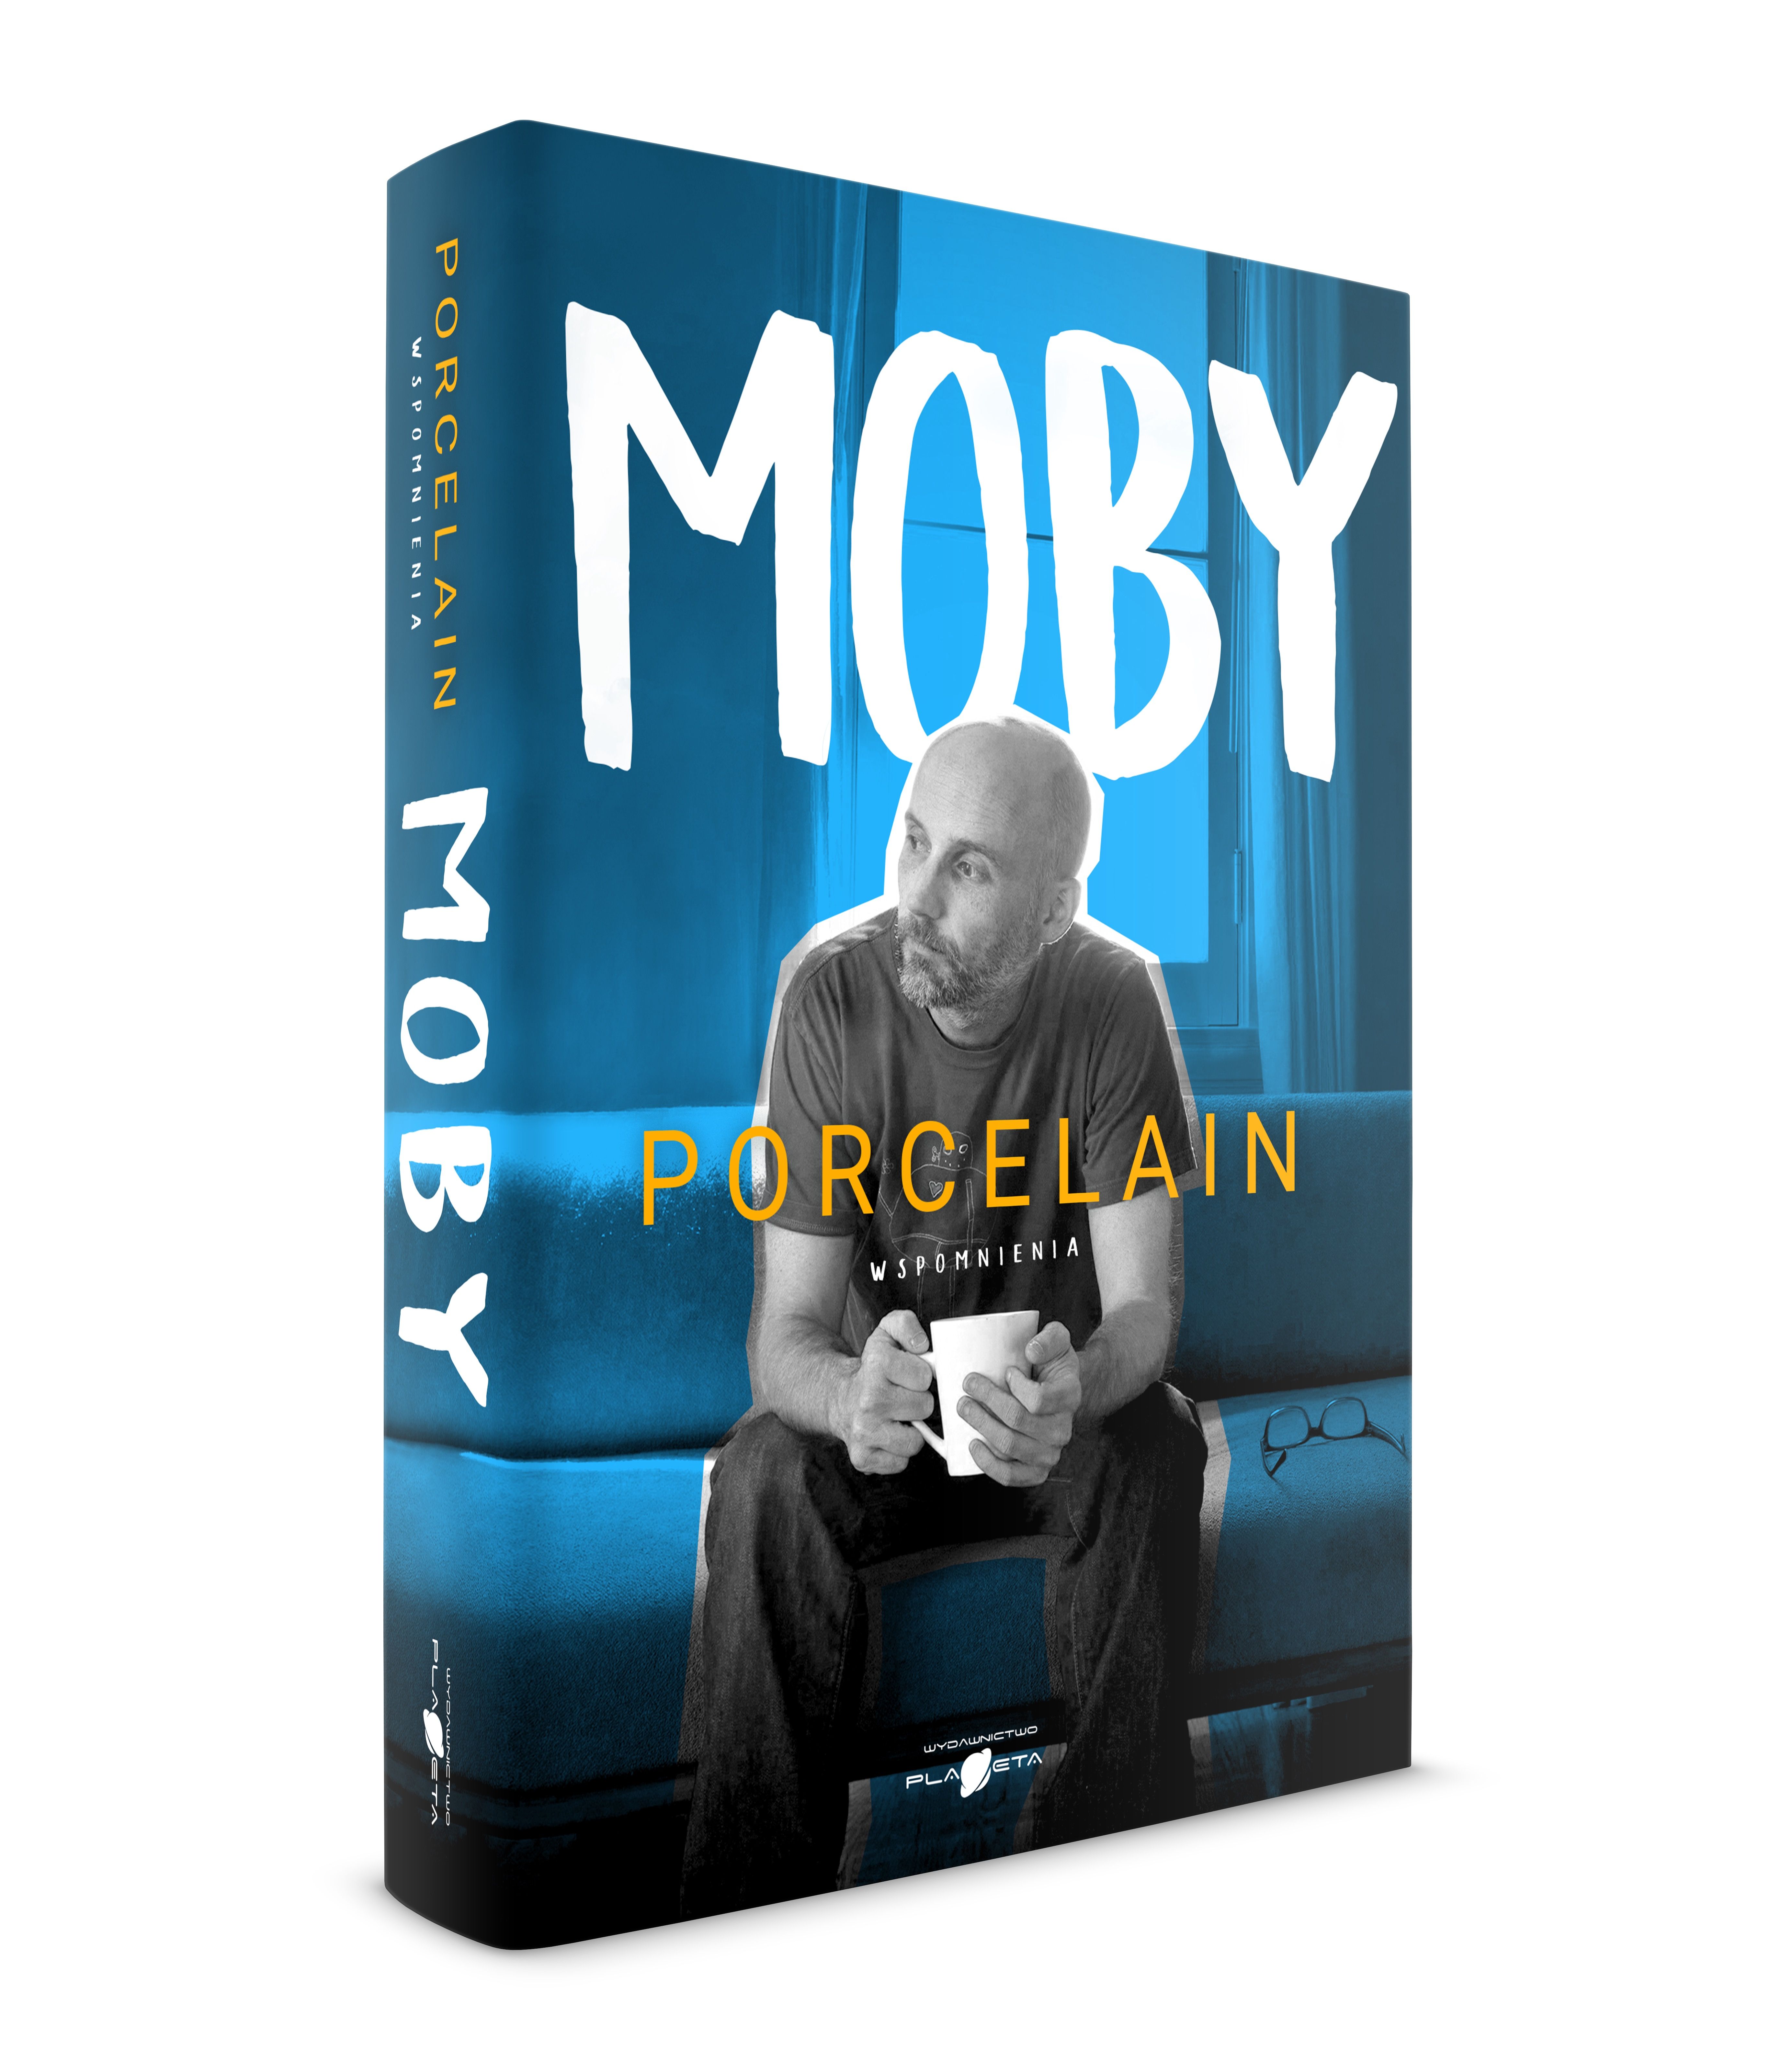  "Porcelain", Moby, wydawnictwo Planeta